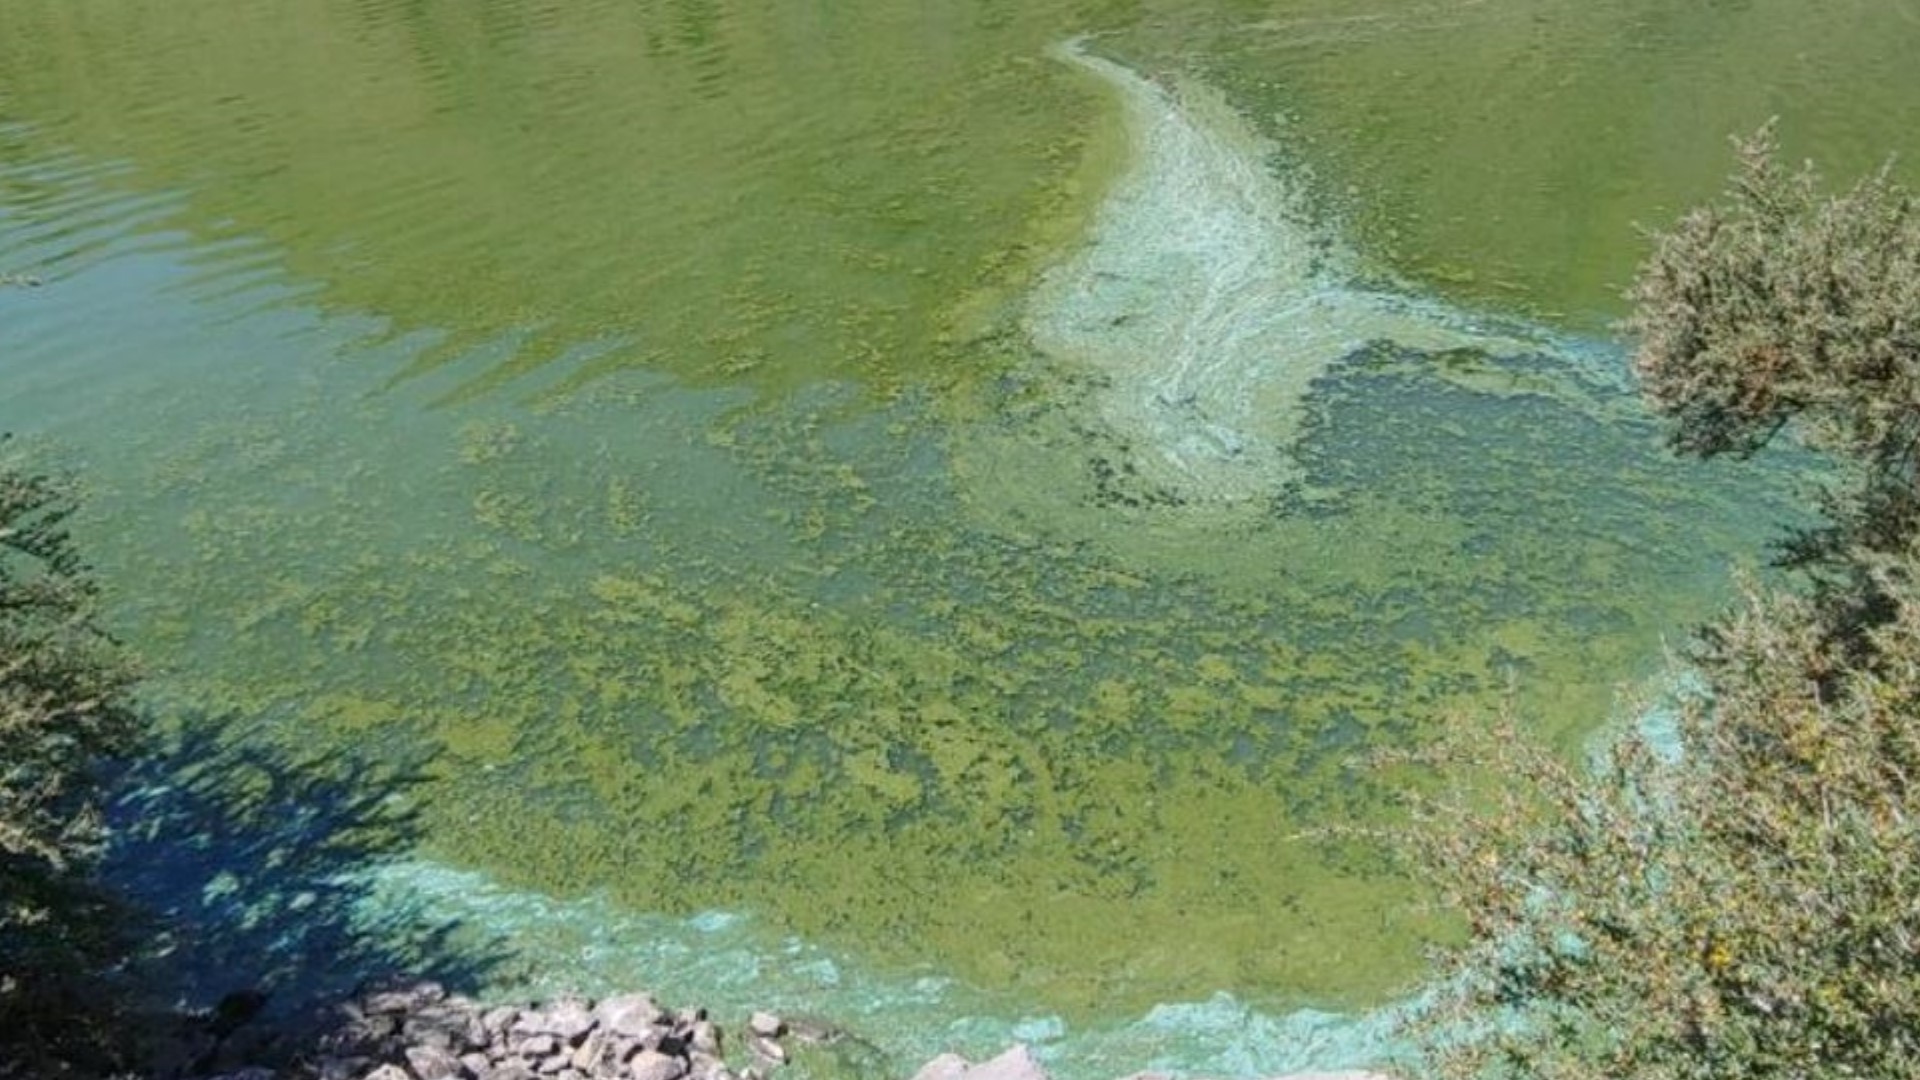 High levels of toxin-producing cyanobacteria were found in samples taken from Brownlee Reservoir. Officials urge extra caution when recreating in or near the water.